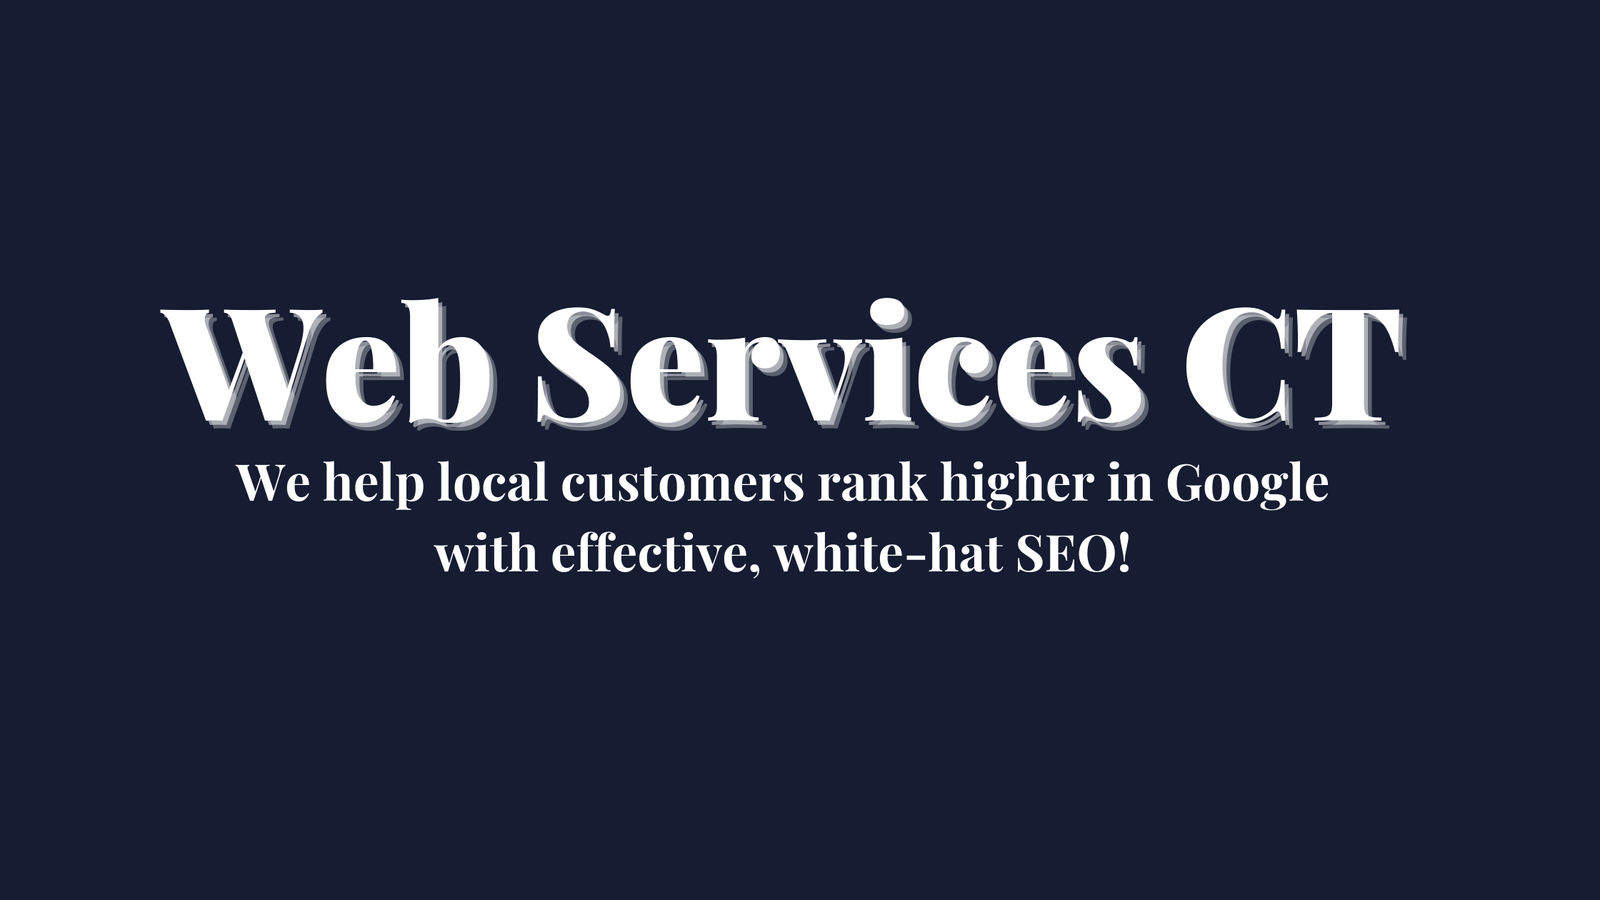 Web Services CT- An Innovative Digital Marketing Company strengthening local businesses